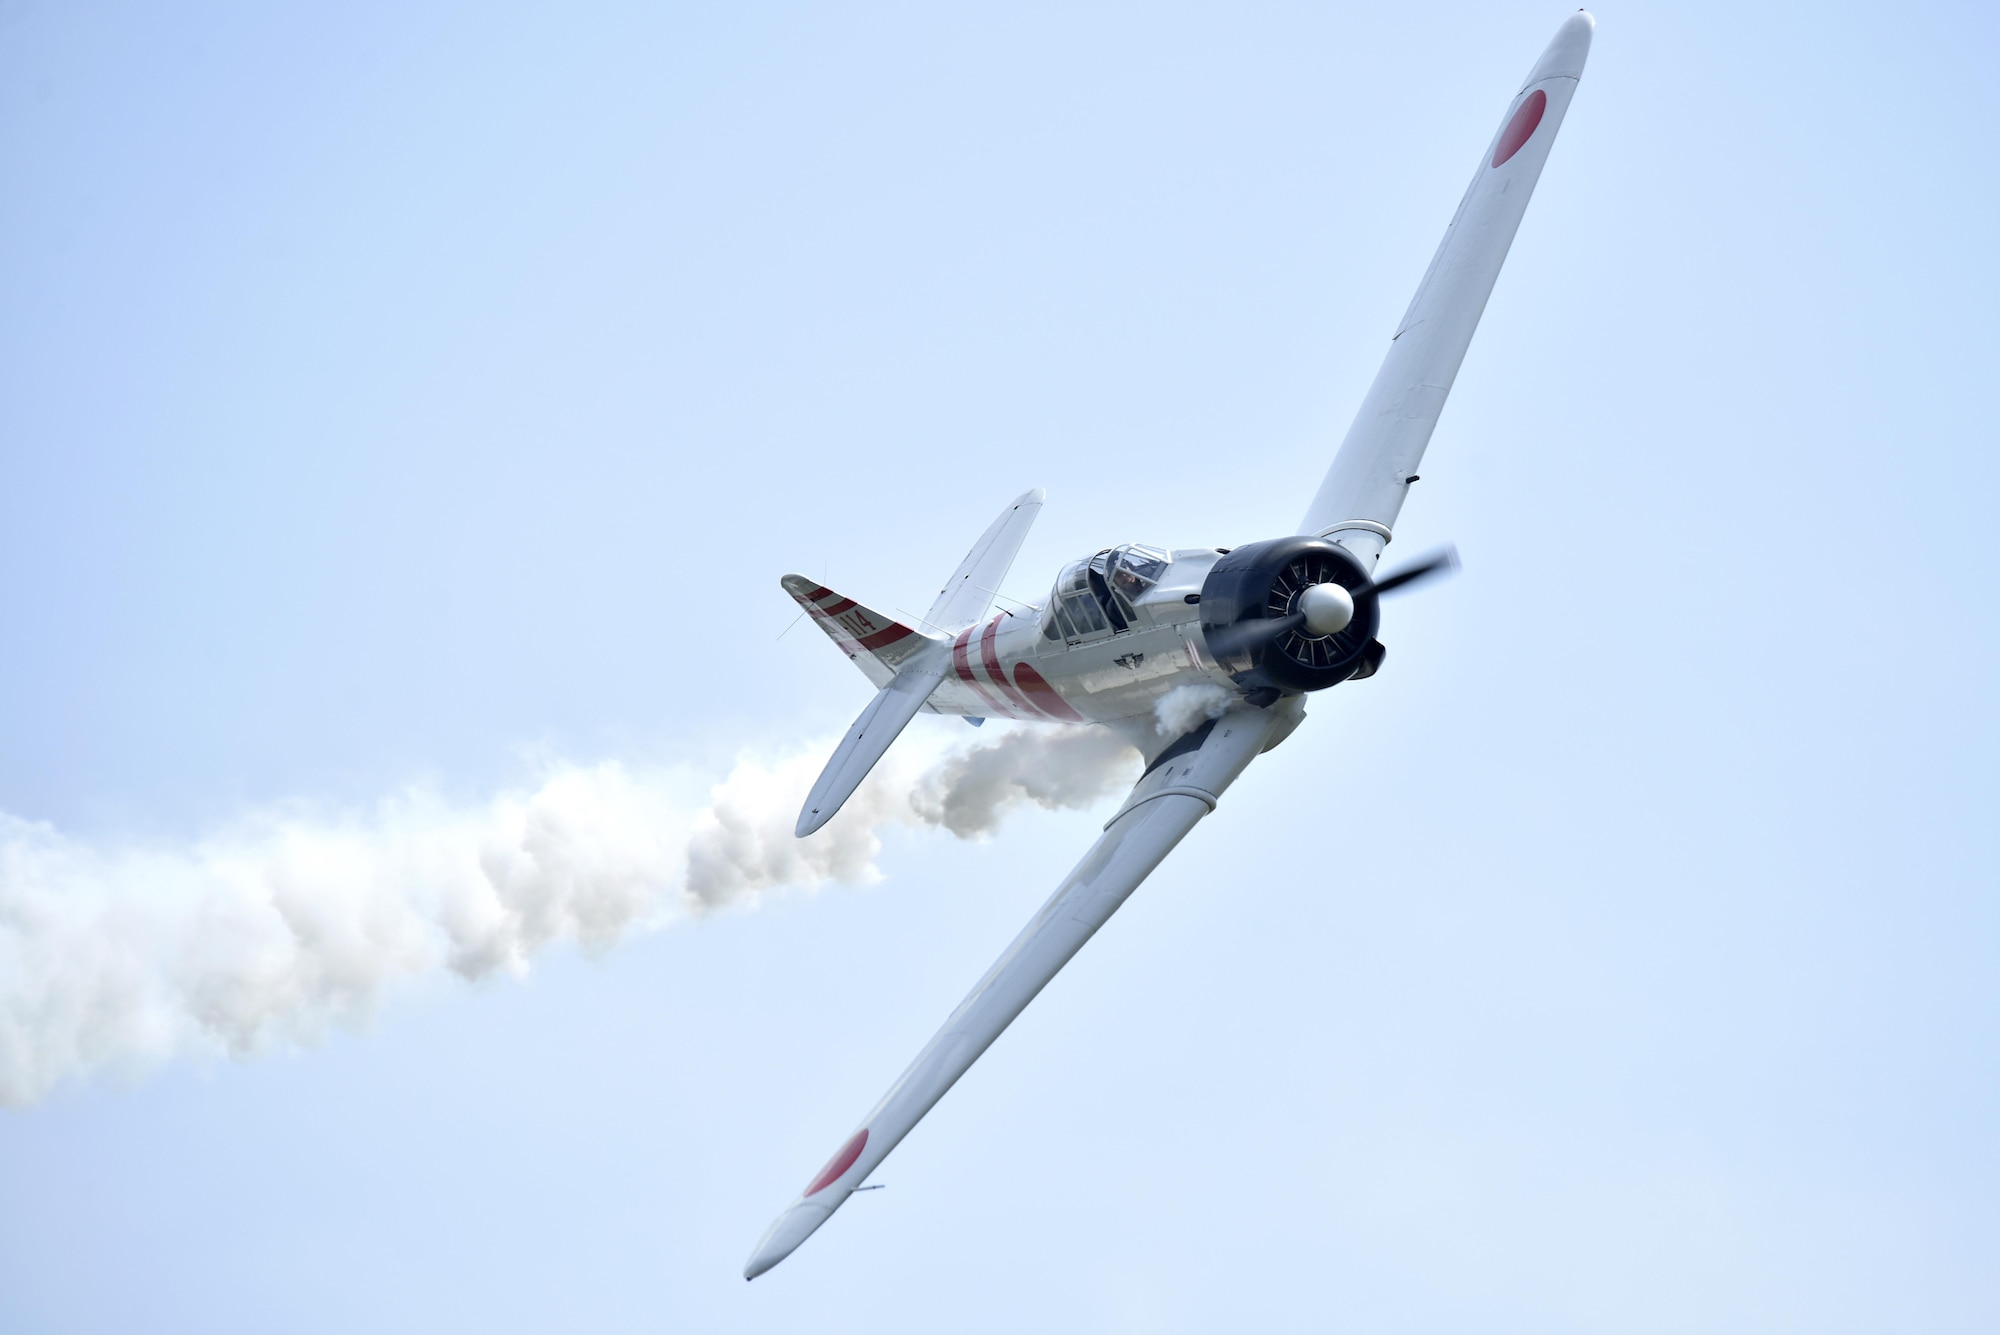 A Japanese Mitsubishi A6M Zero aircraft performs as part of the "Tora! Tora! Tora!" performance during the Wings Over Wayne Air Show, May 21, 2017, at Seymour Johnson Air Force Base, North Carolina. The installation is open to the public for two, free, daylong air and ground demonstration performances. (U.S. Air Force photo by Airman 1st Class Christopher Maldonado)